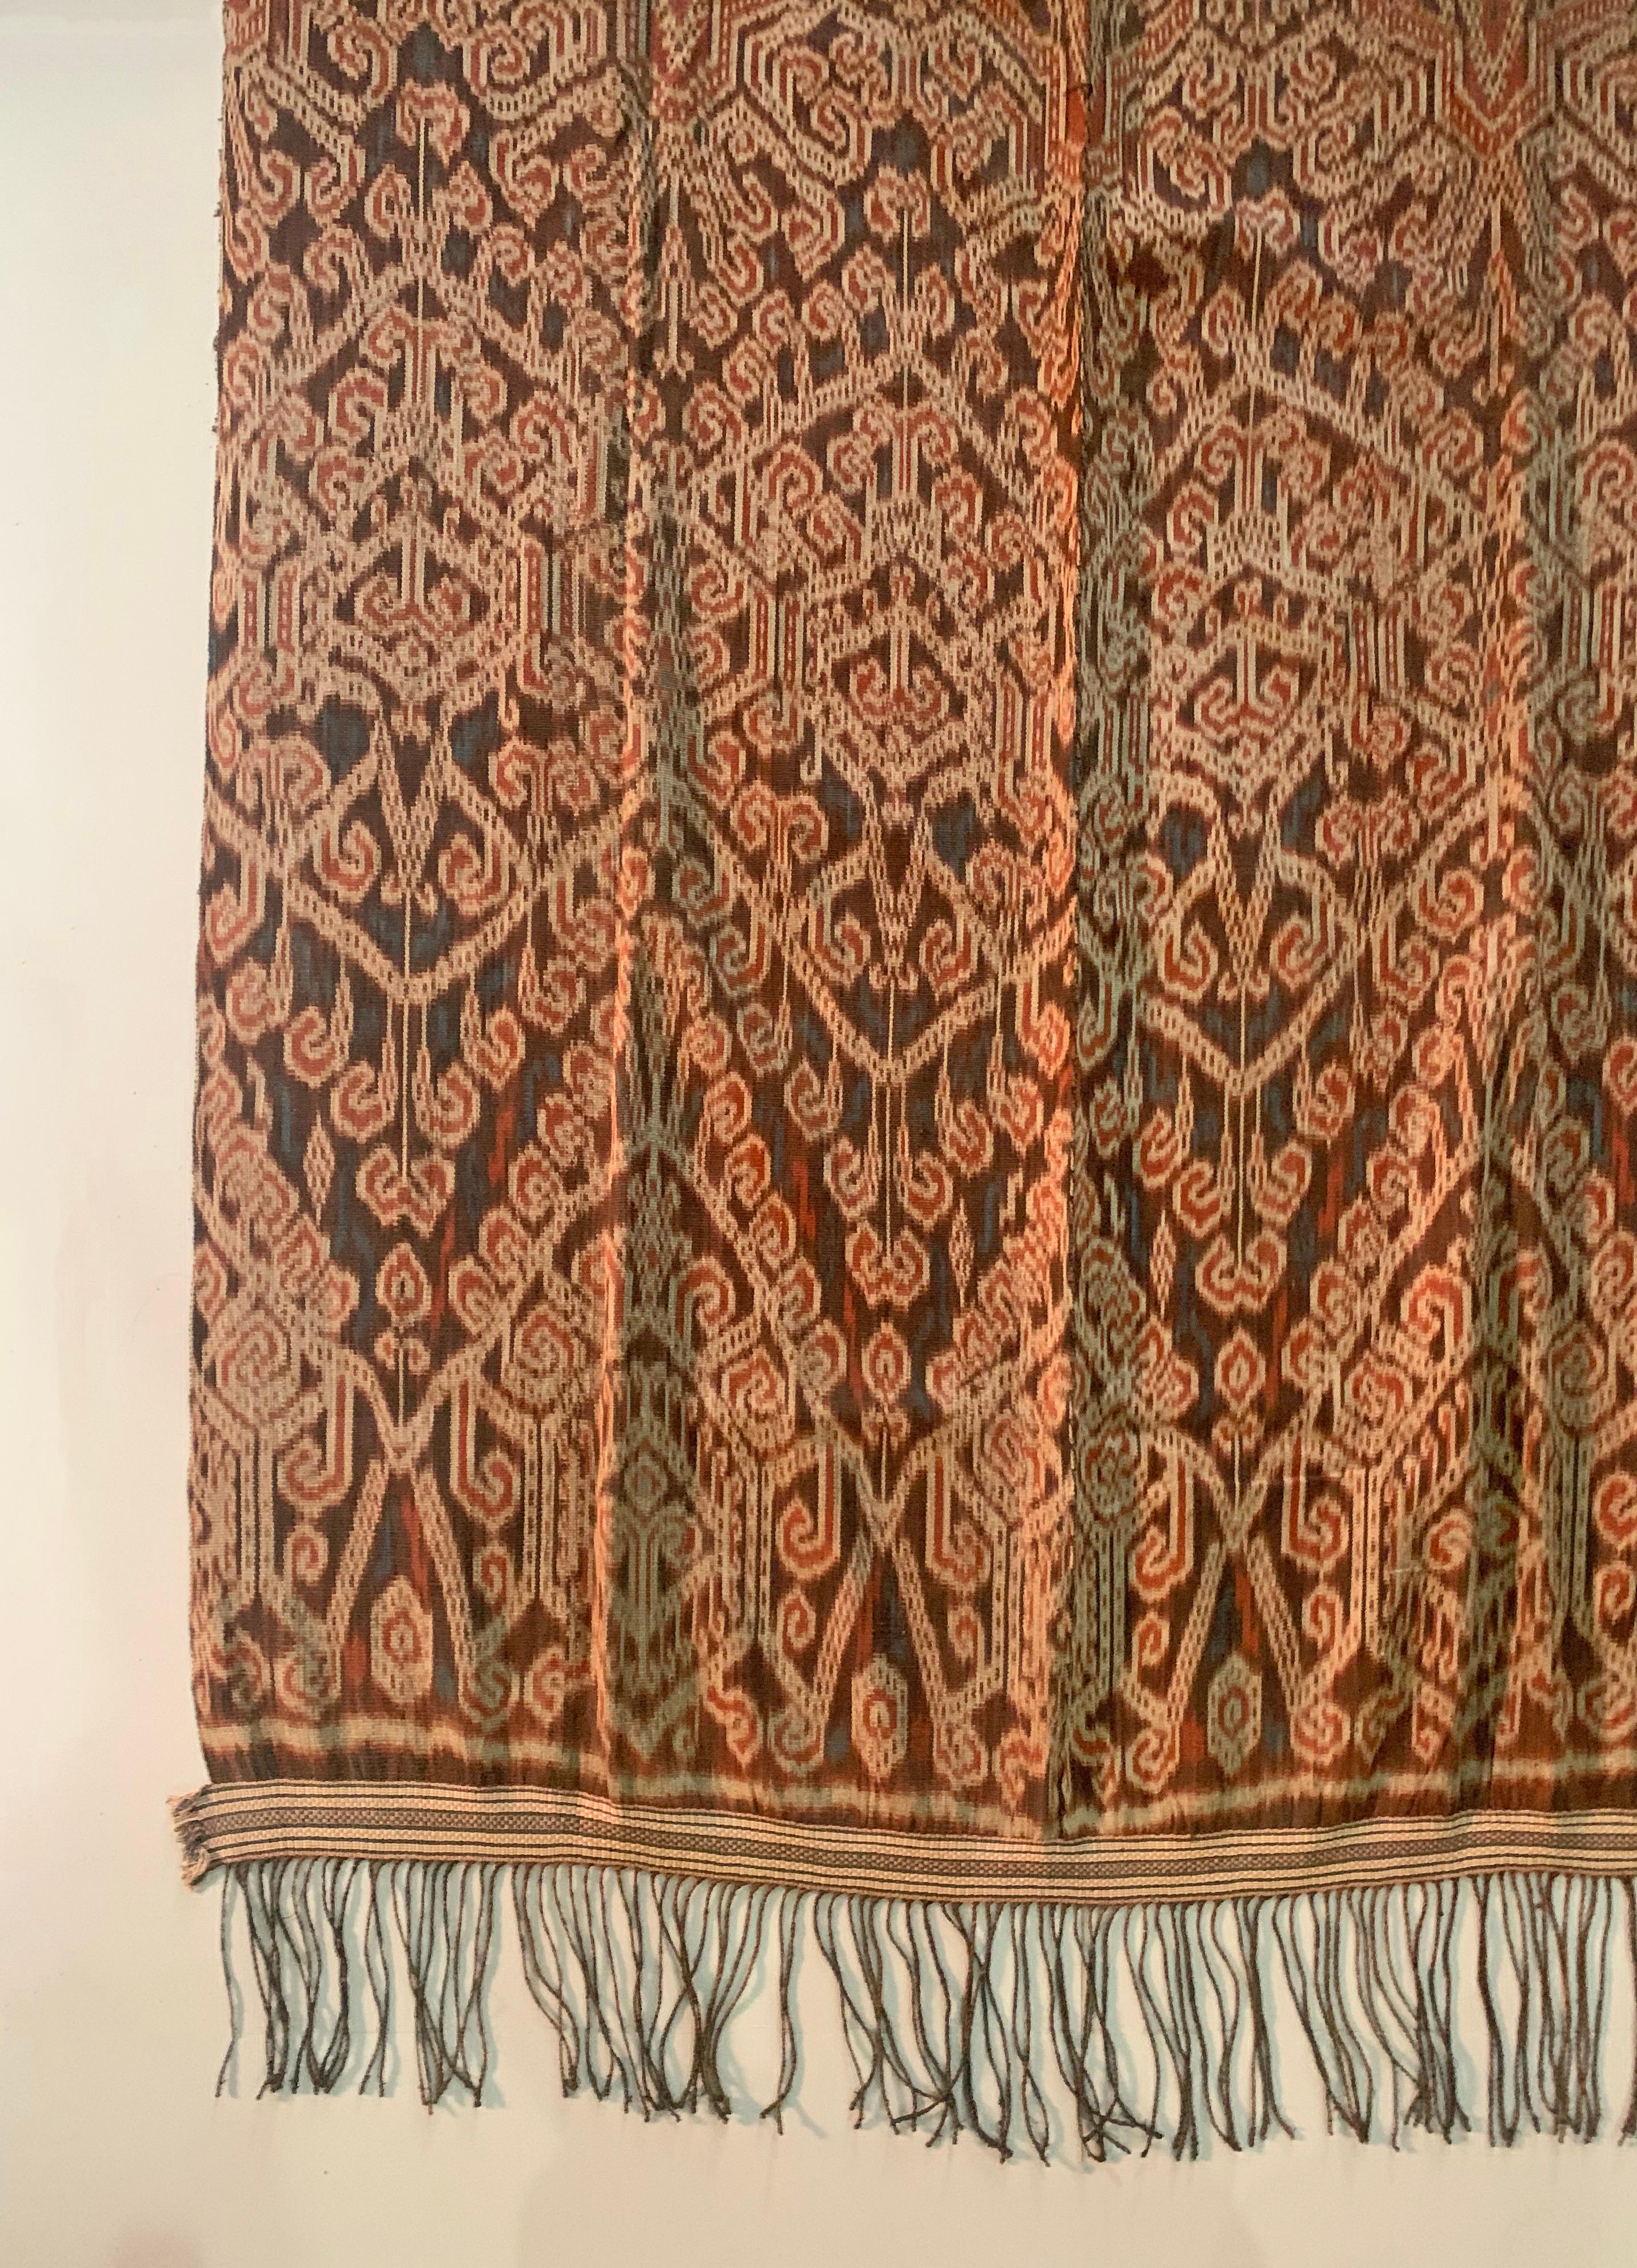 This Ikat textile originates from the Island of Sumba, Indonesia. It is hand-woven using naturally dyed yarns via a method passed on through generations. It features a stunning array of distinct tribal patterns. It takes months to complete a single